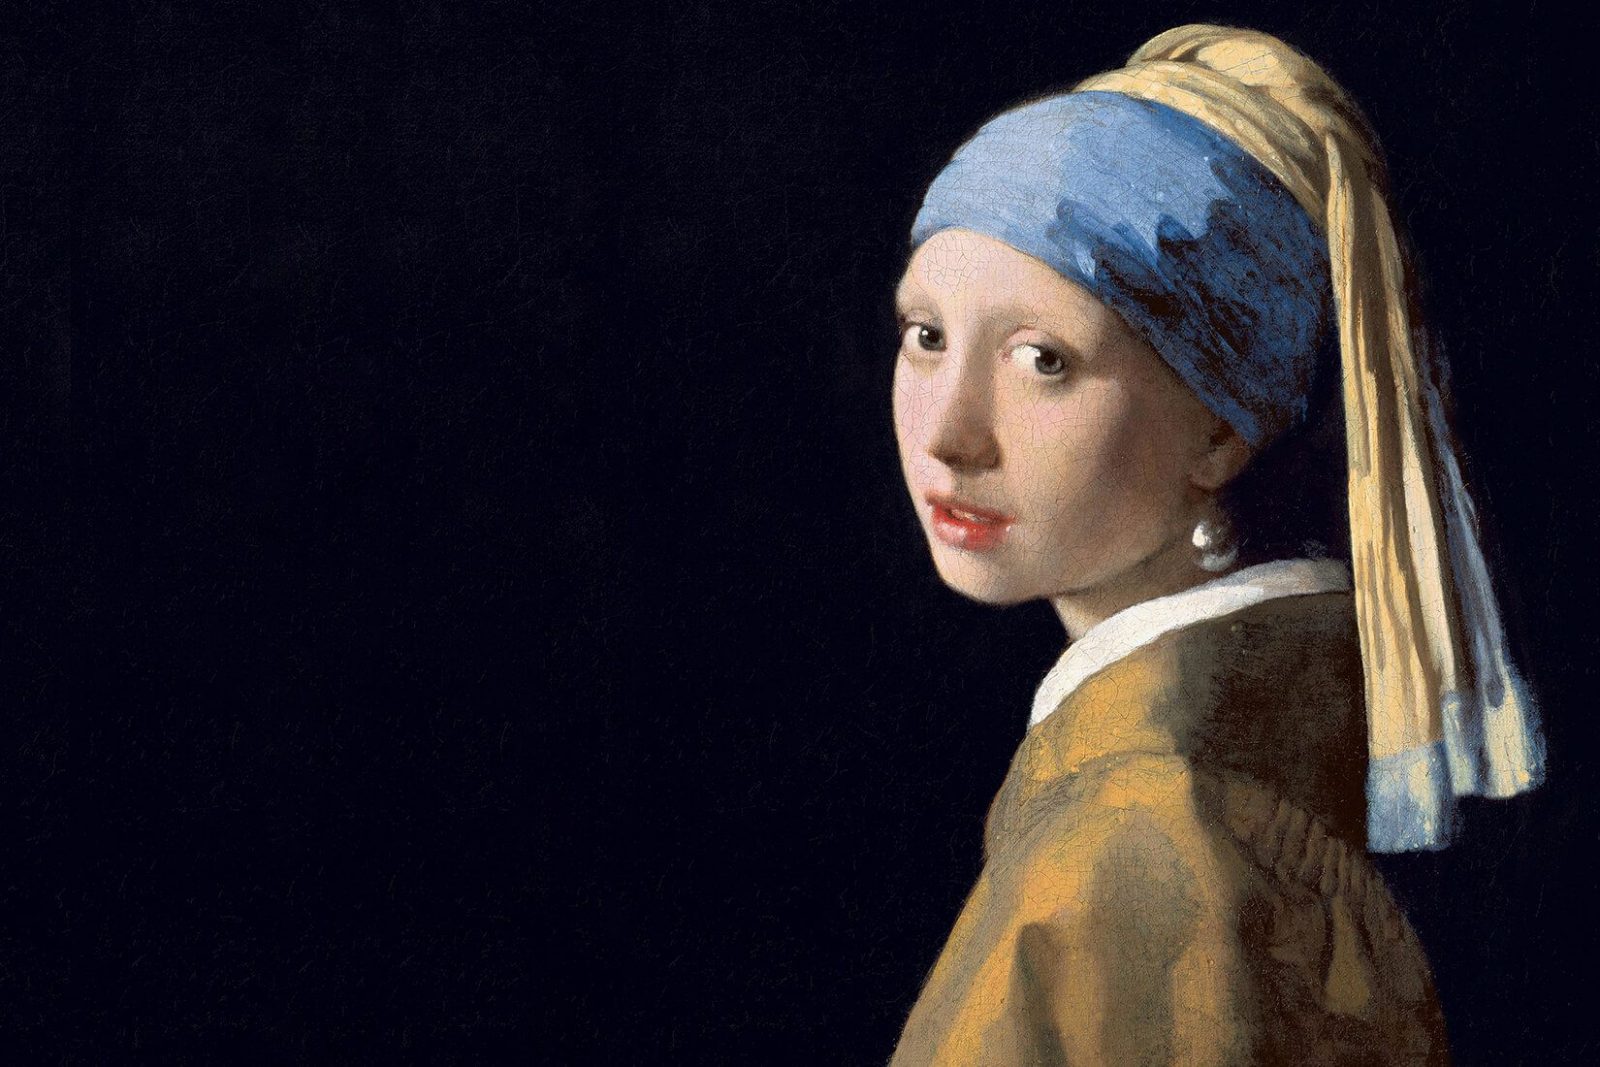 Can You Match These Famous Paintings to Their Legendary Creators? Girl with a Pearl Earring